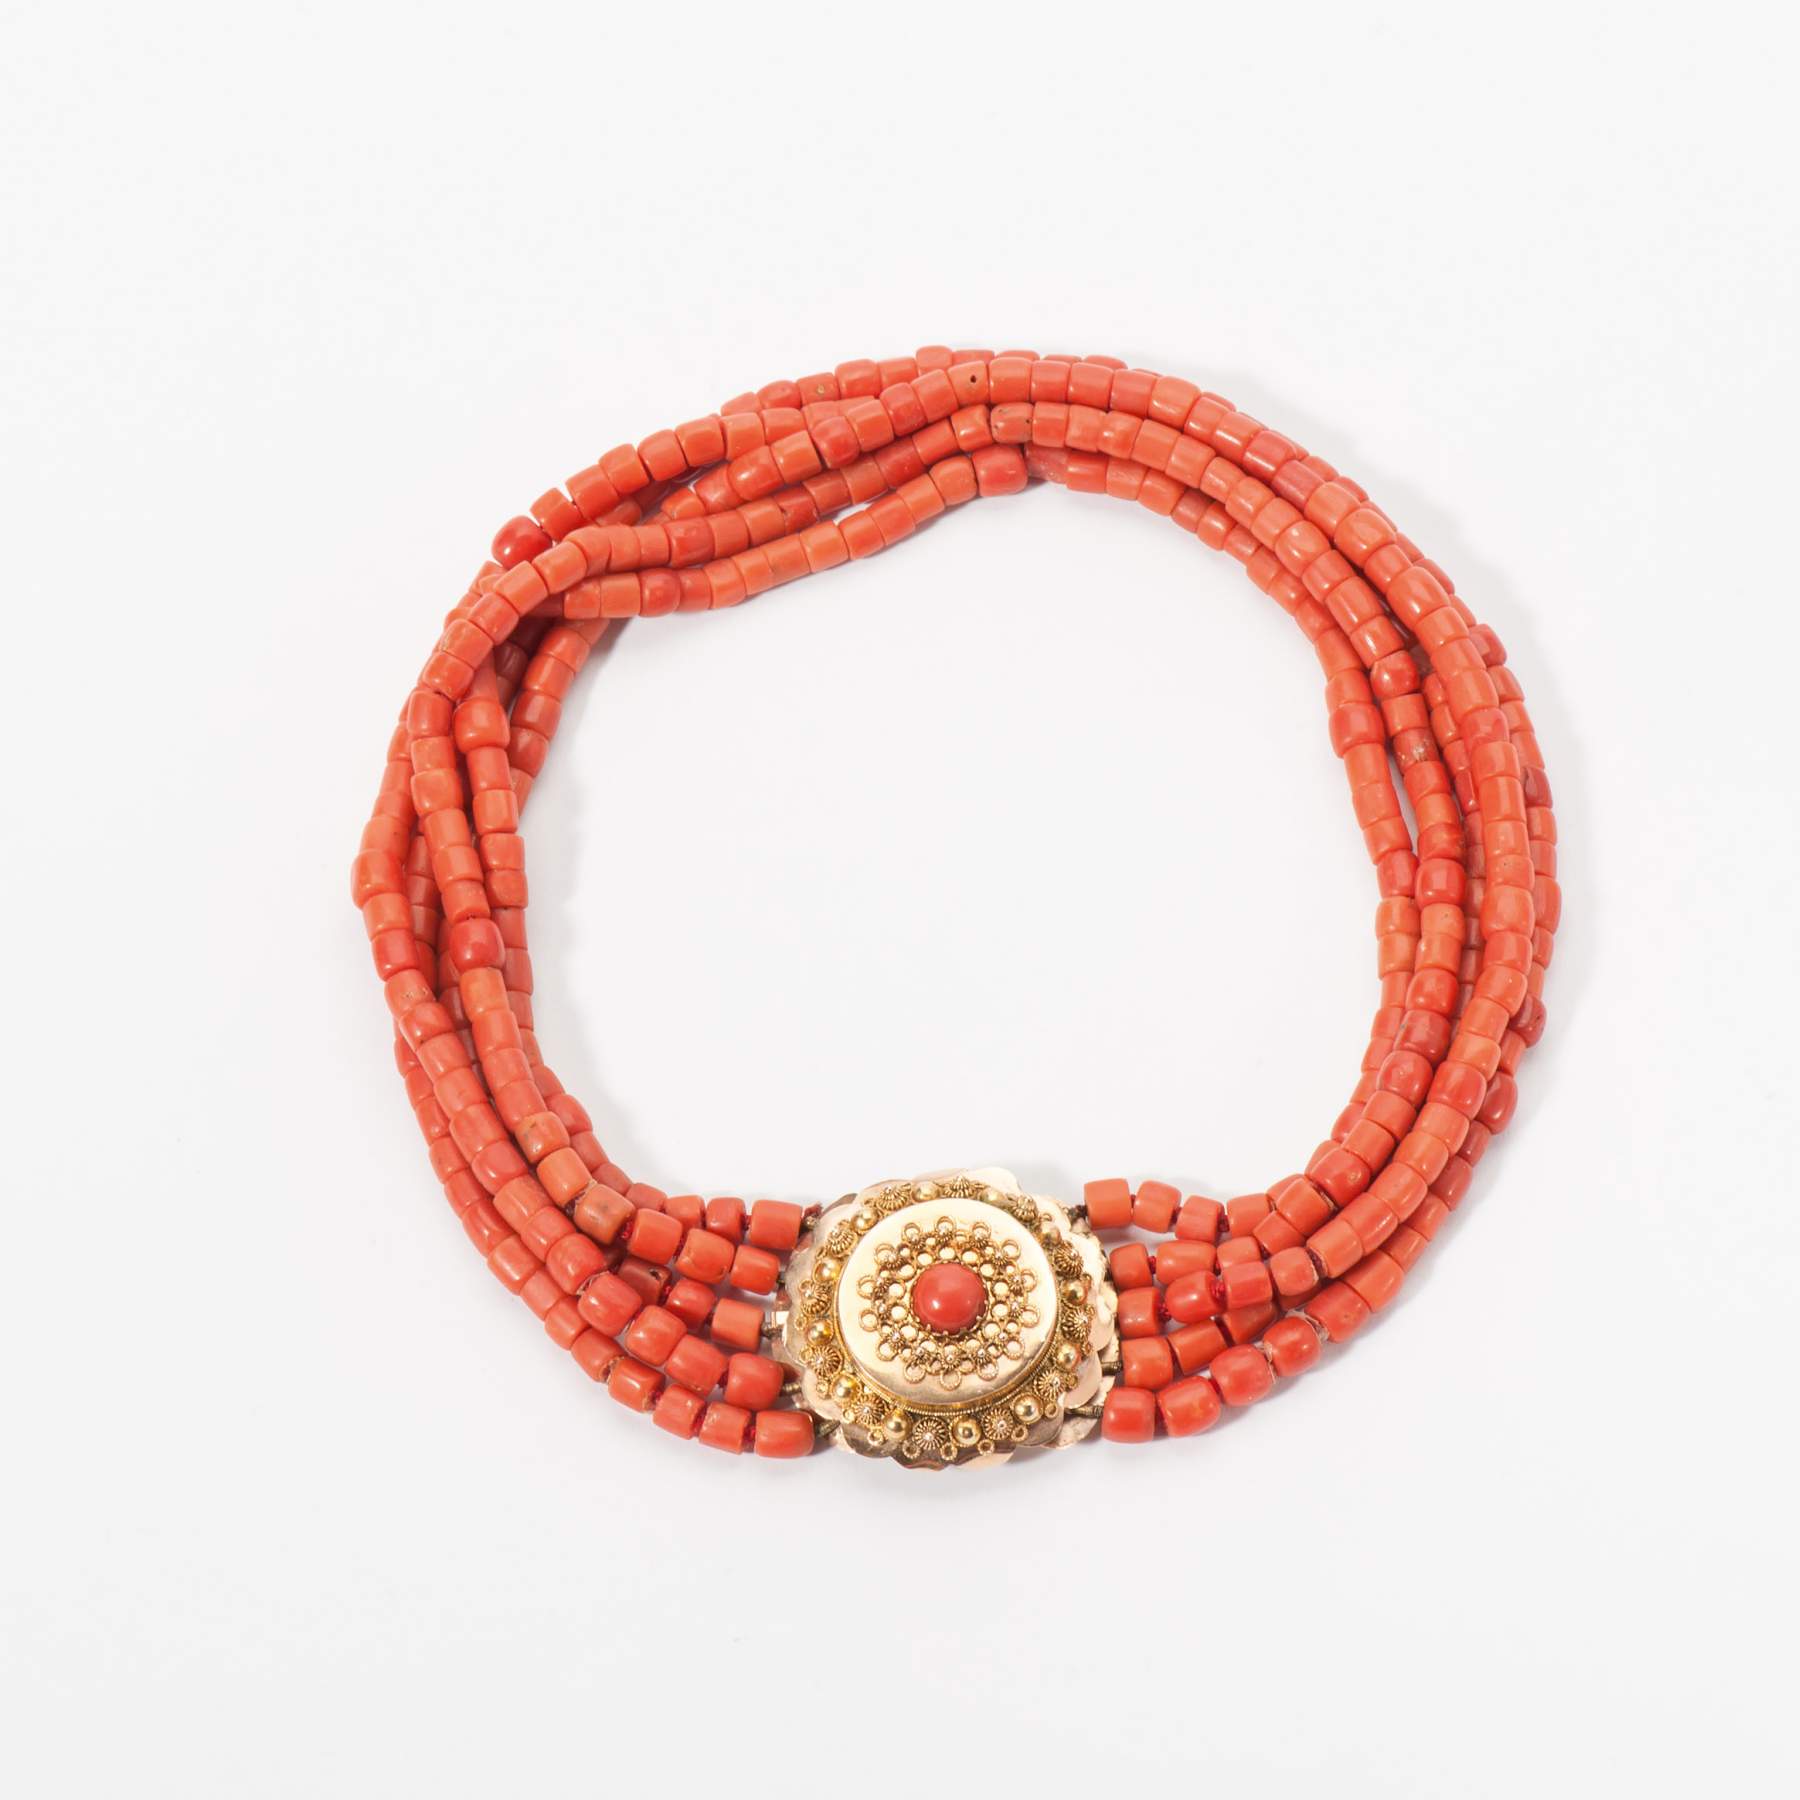 An antique five rowed red coral choker on a 14 carat gold lock